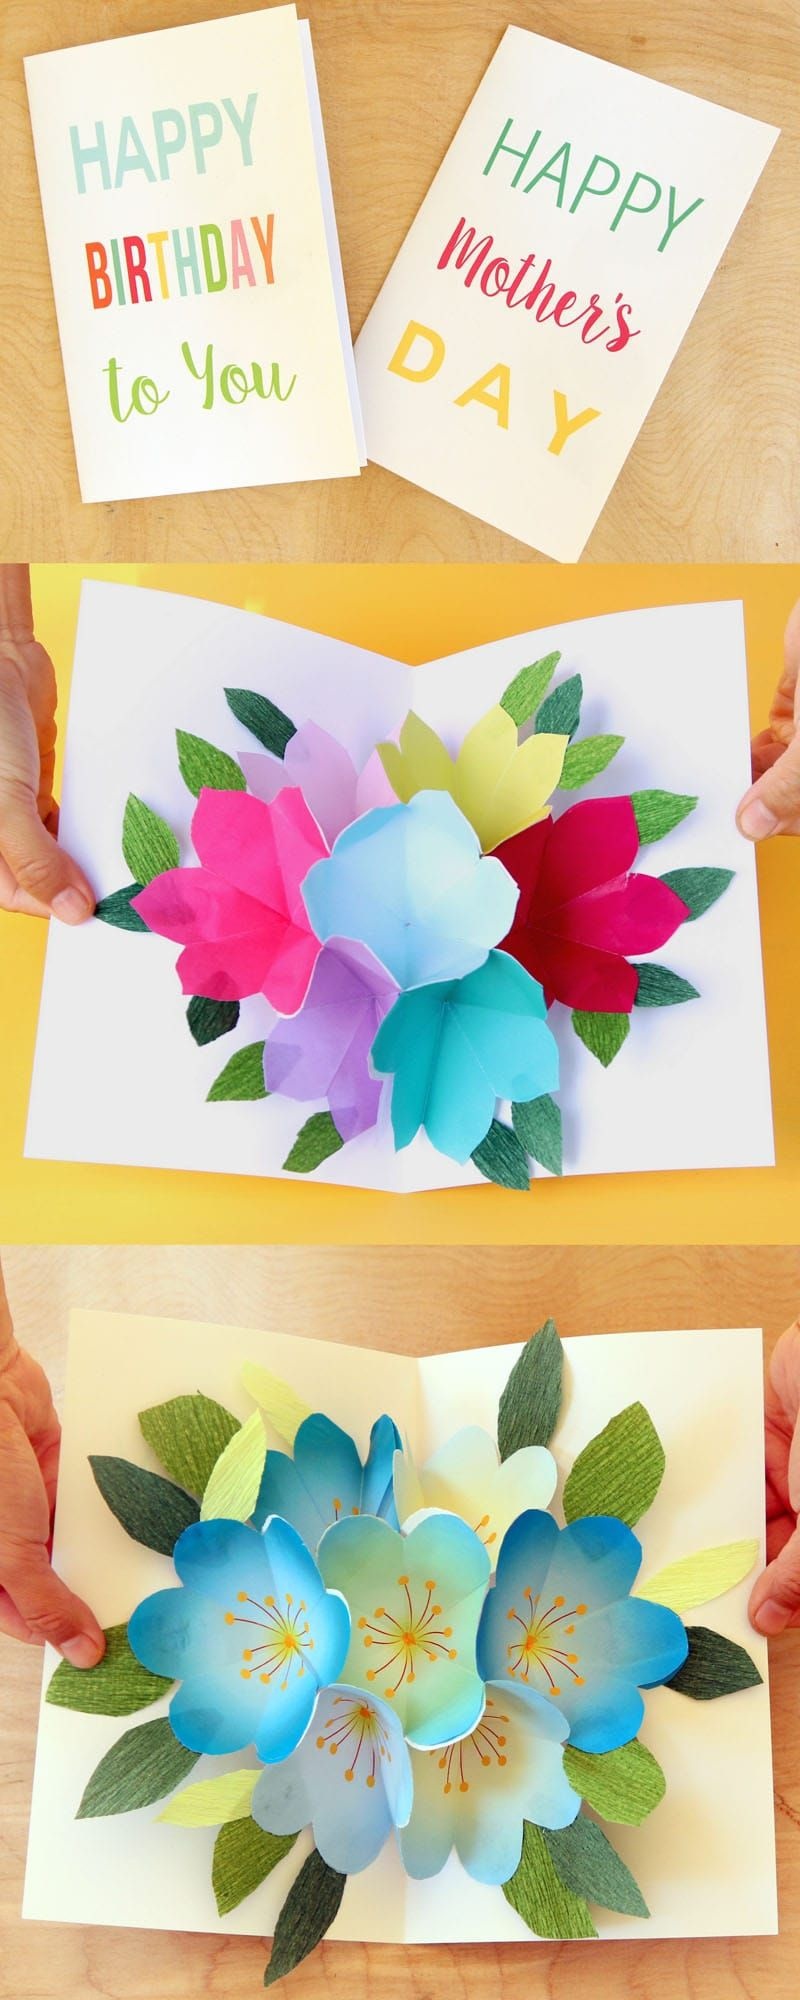 Free Printable Happy Birthday Card With Pop Up Bouquet | Printables - Create Greeting Cards Online Free Printable